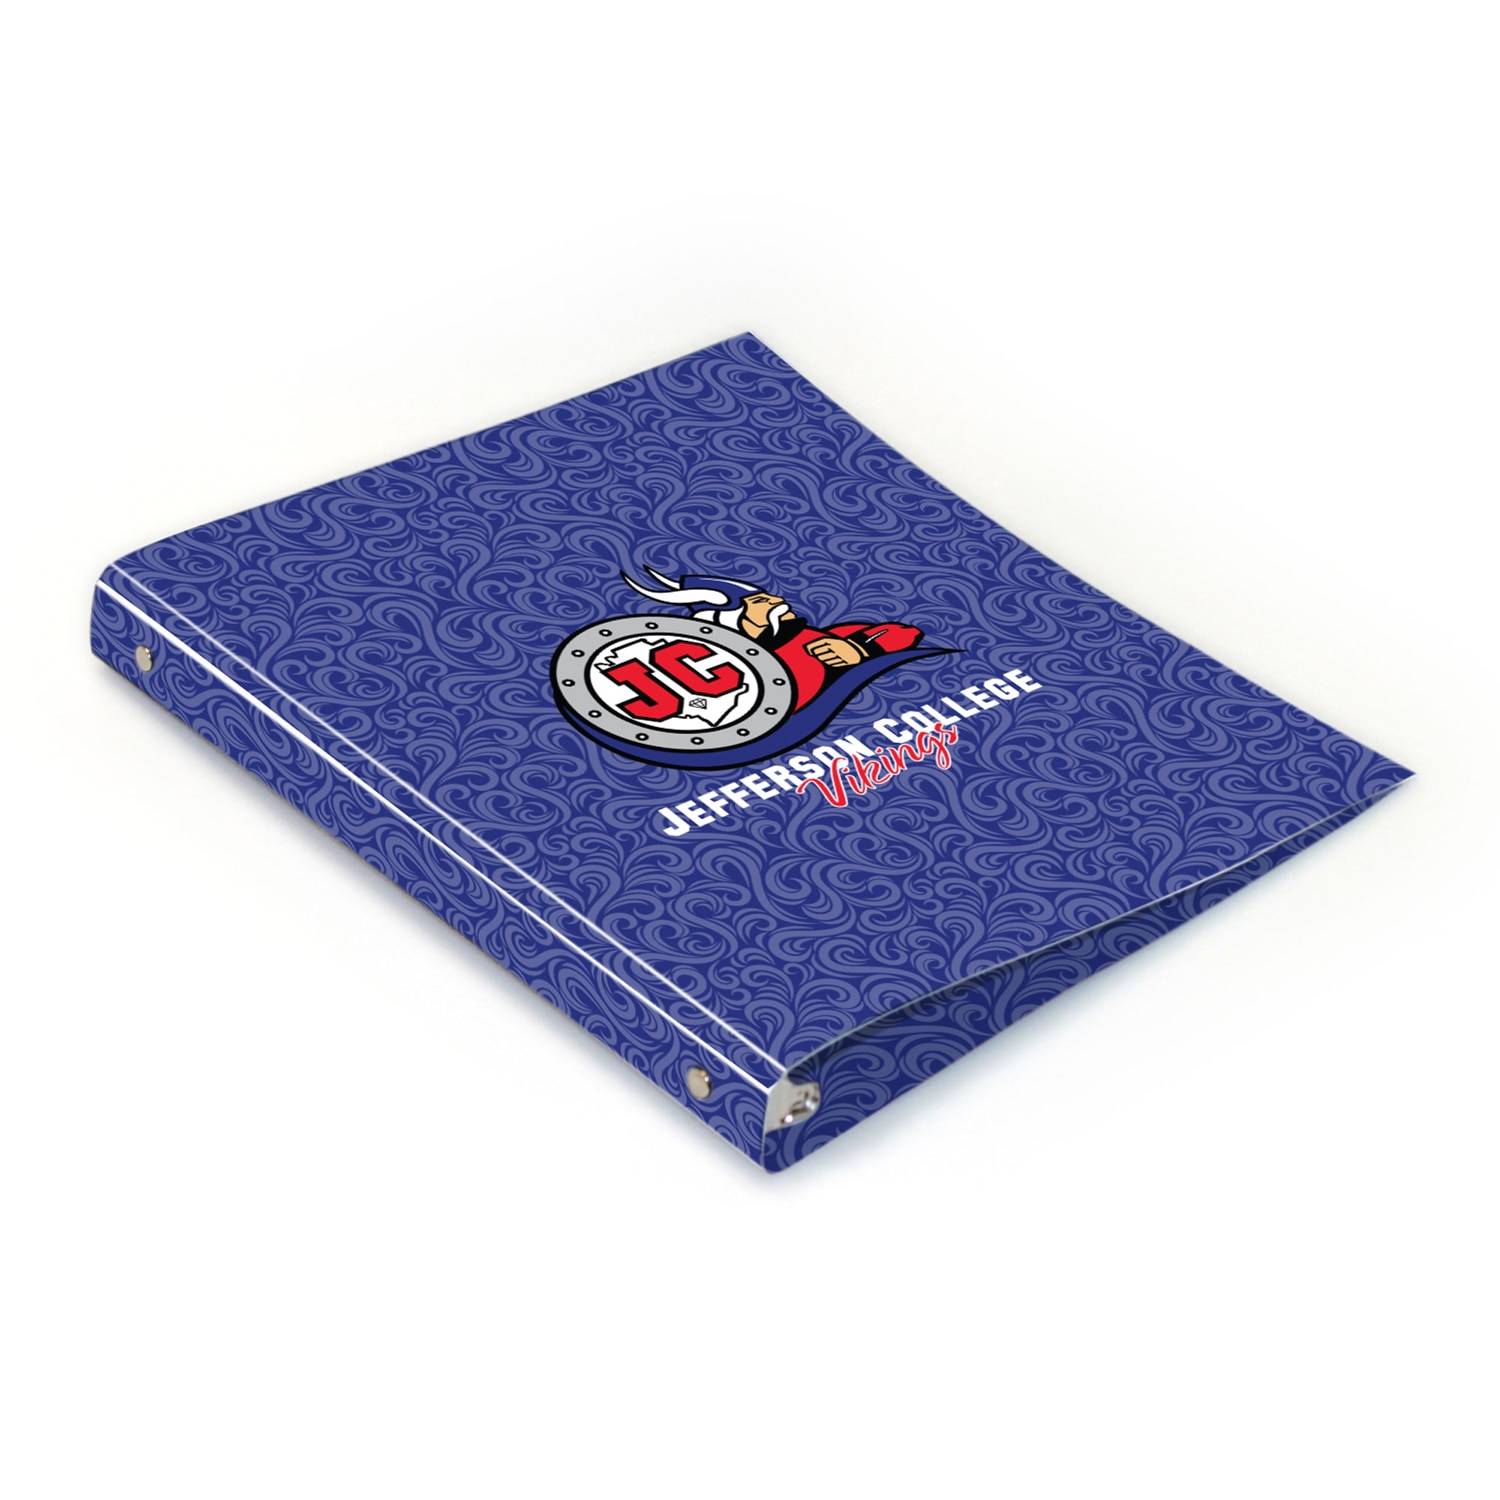 Jefferson College Full Color 2 sided Imprinted Flexible 1" Logo 2 Binder 10.5" x 11.5"